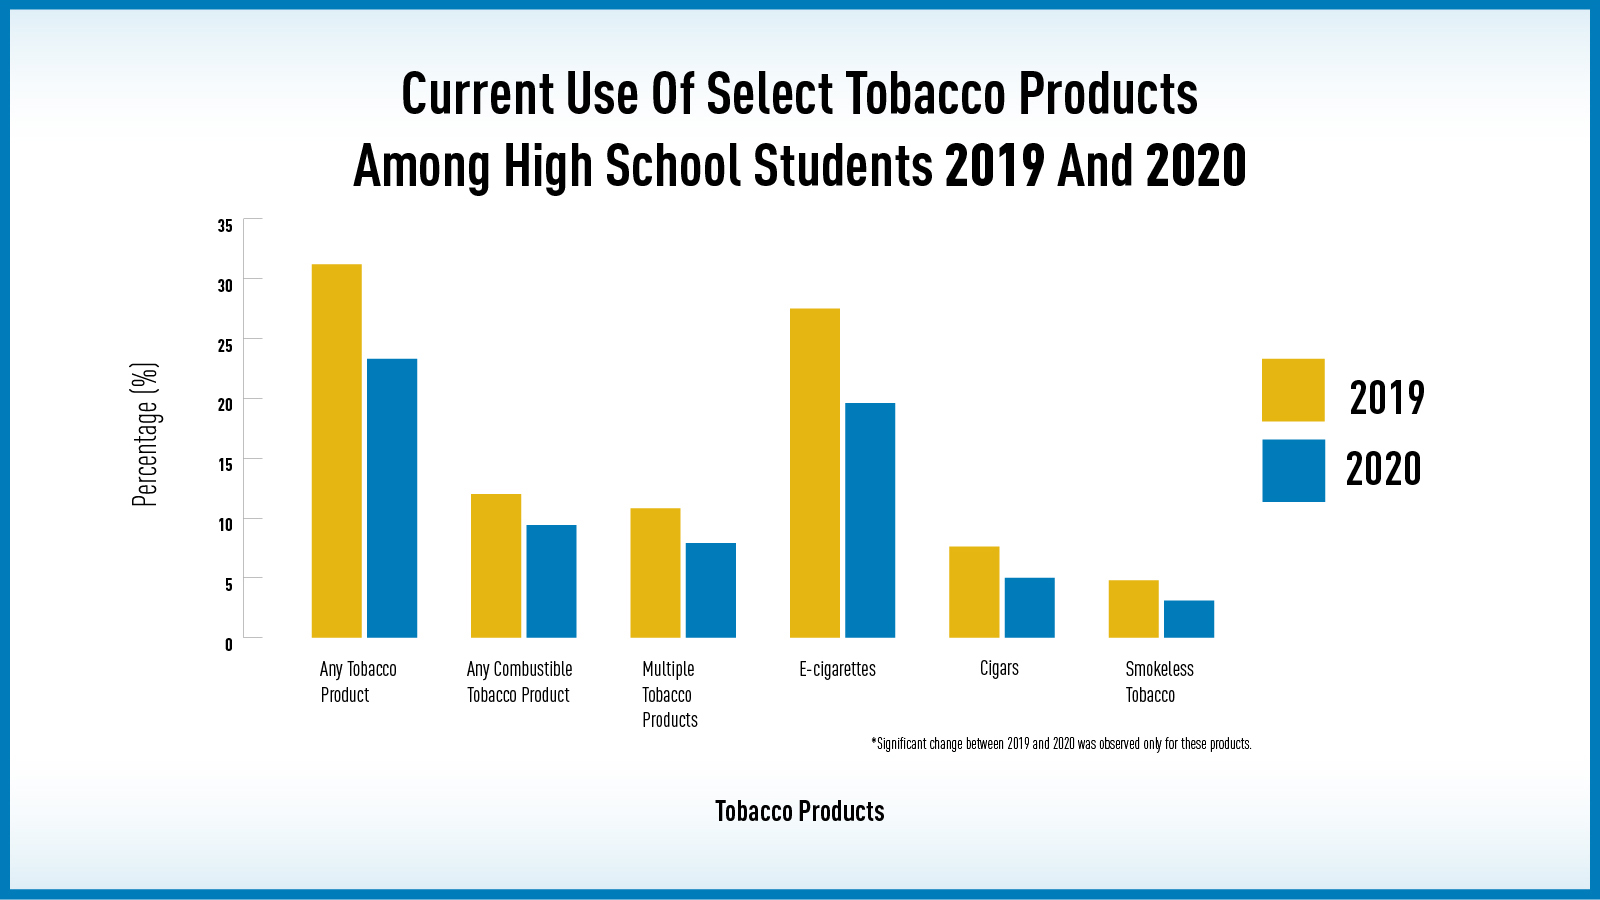 Current Use of Select Tobacco Products Among High School Students 2019 and 2020